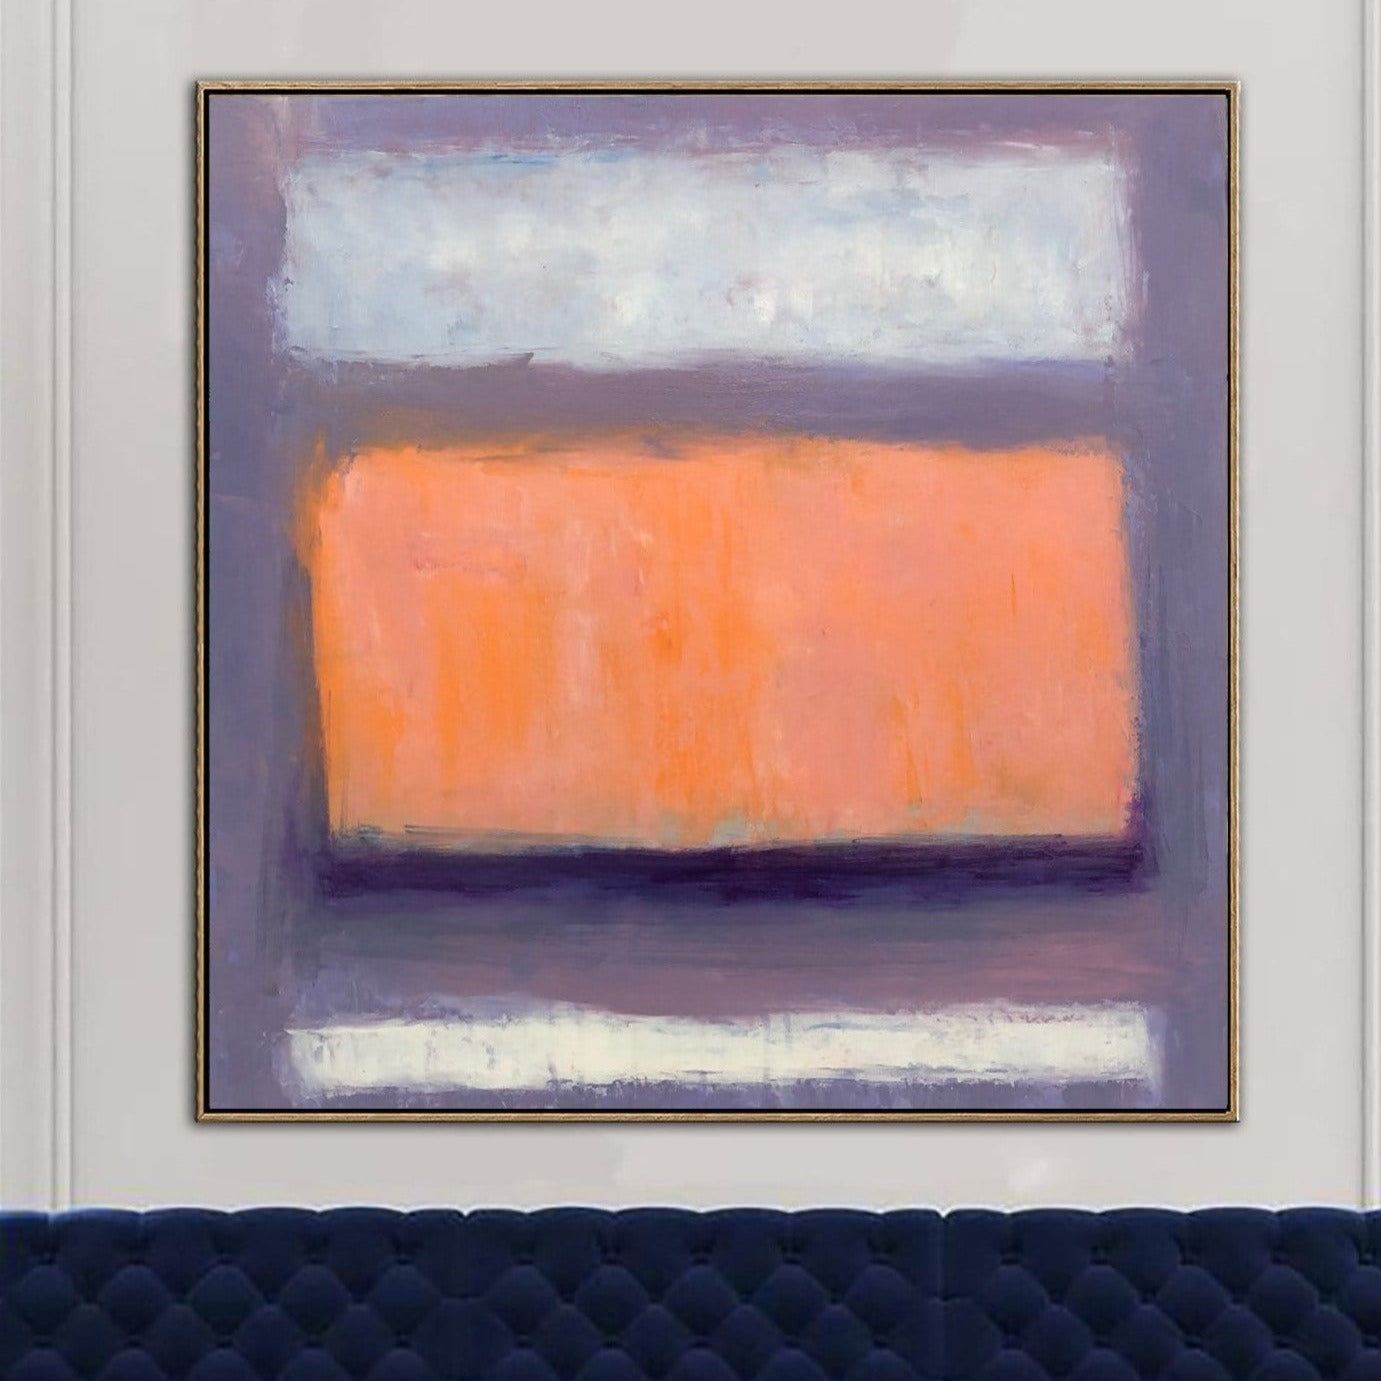 How to choose a painting for a bright room? slider2-image-2